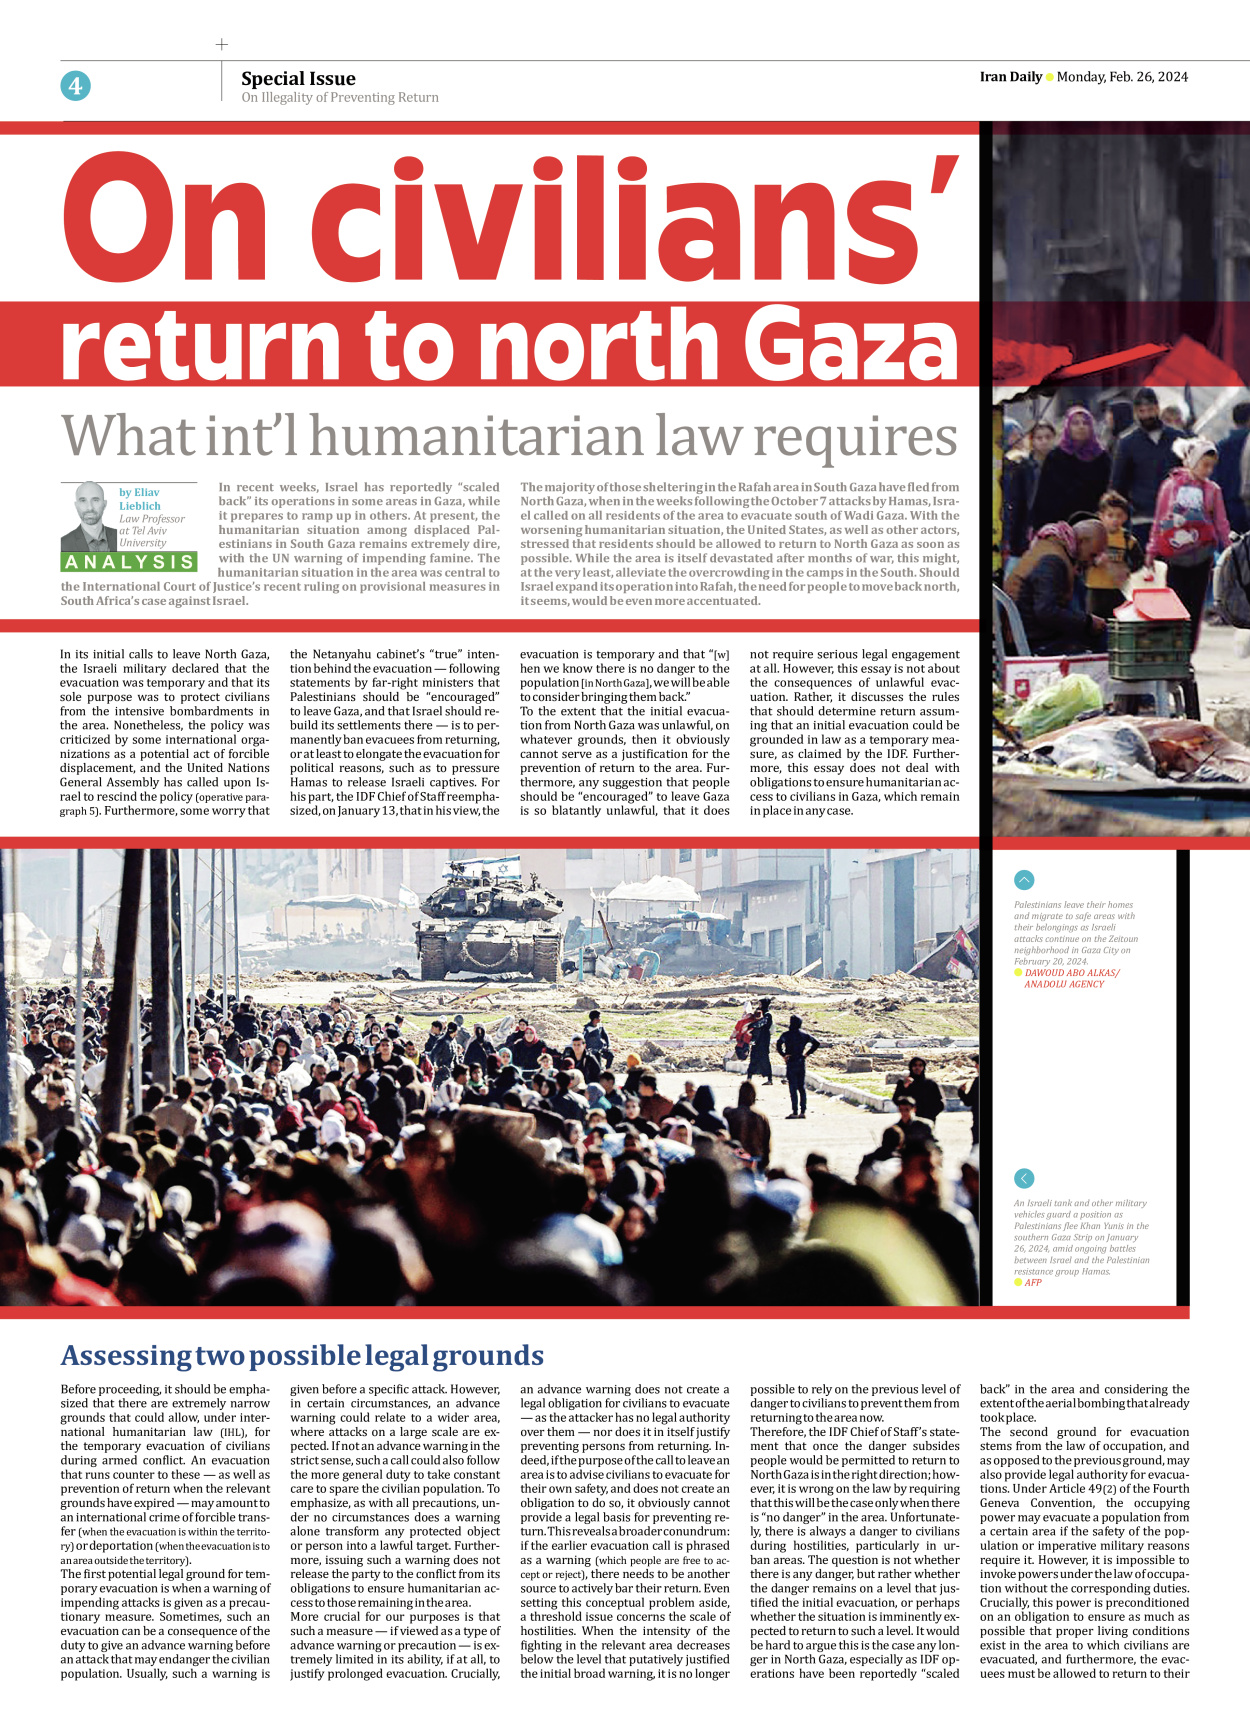 Iran Daily - Number Seven Thousand Five Hundred and Fifteen - 26 February 2024 - Page 4